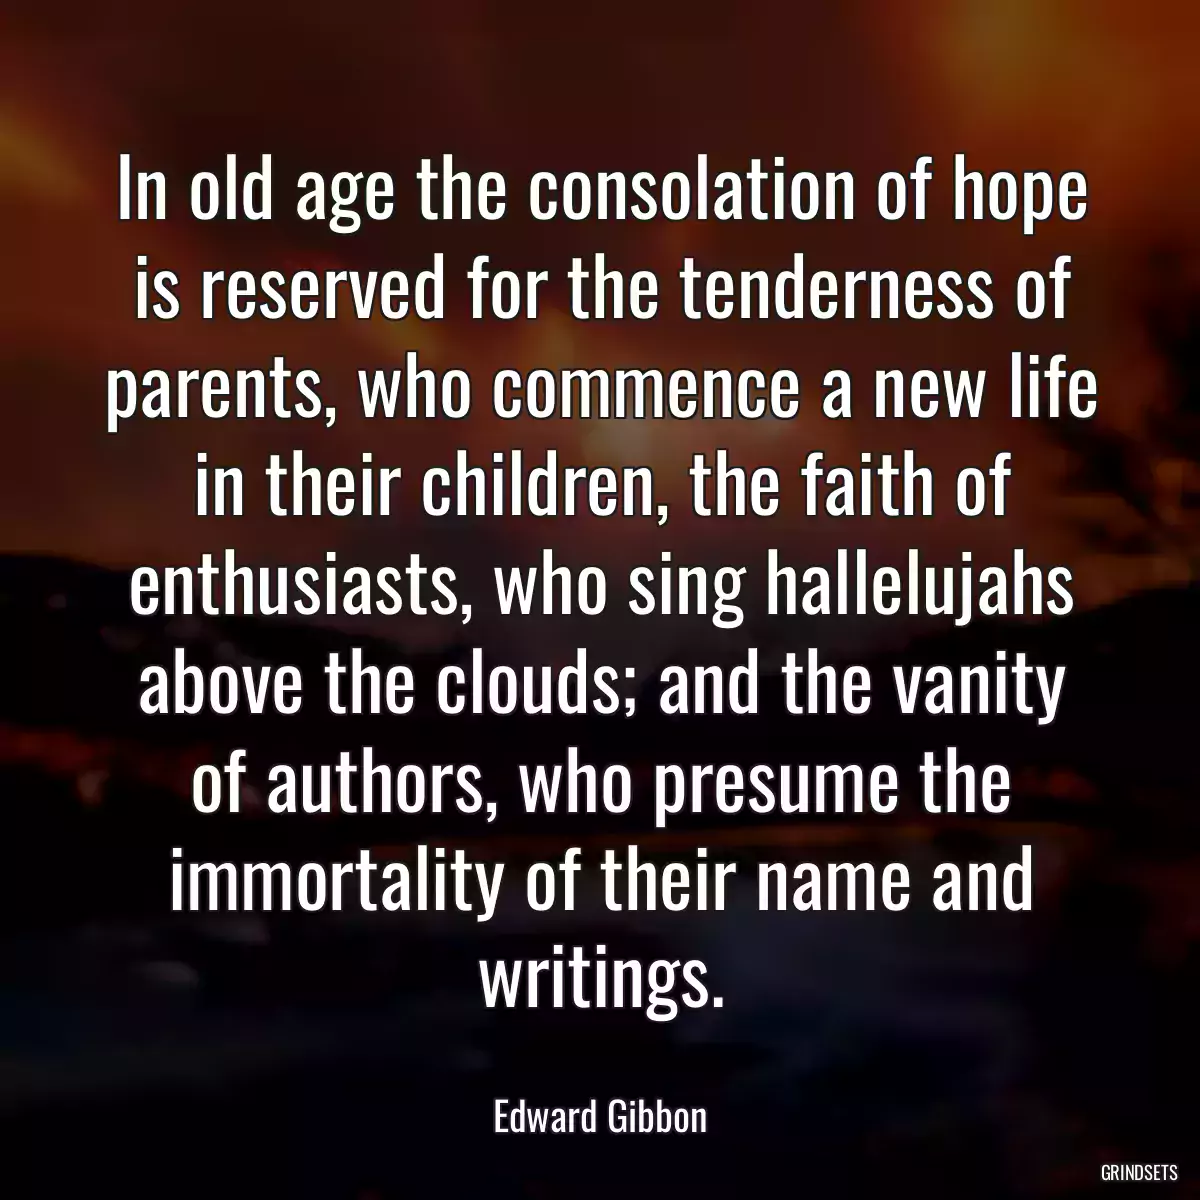 In old age the consolation of hope is reserved for the tenderness of parents, who commence a new life in their children, the faith of enthusiasts, who sing hallelujahs above the clouds; and the vanity of authors, who presume the immortality of their name and writings.